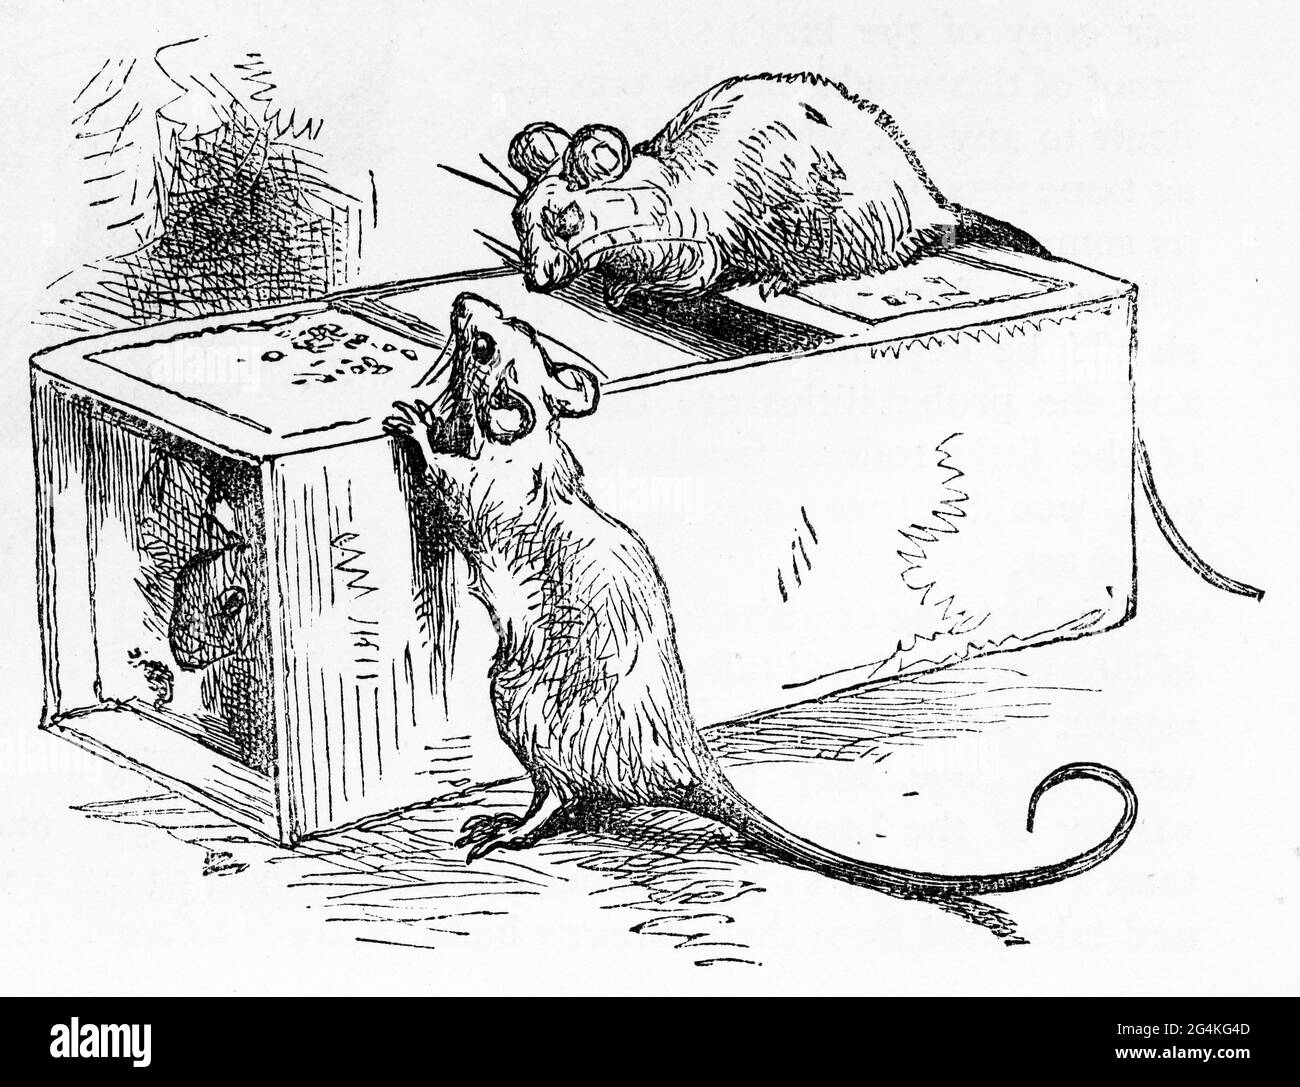 Engraving of three rats playing around on a food box Stock Photo